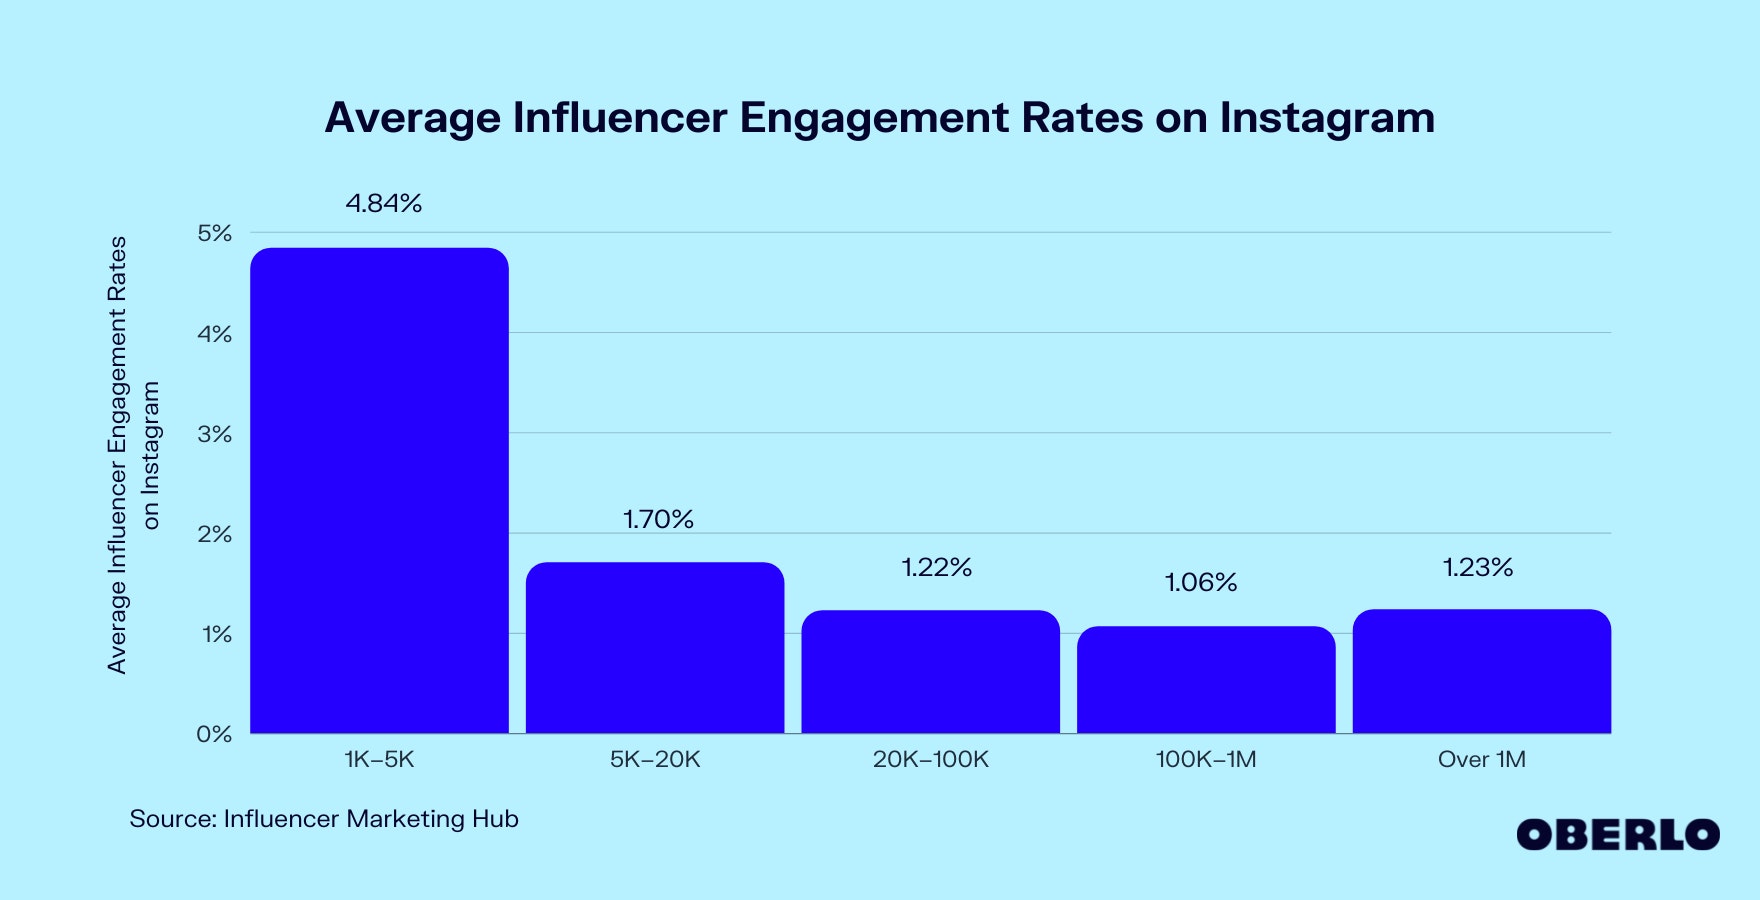 What Should Influencer Engagemetn Rates Look Like?